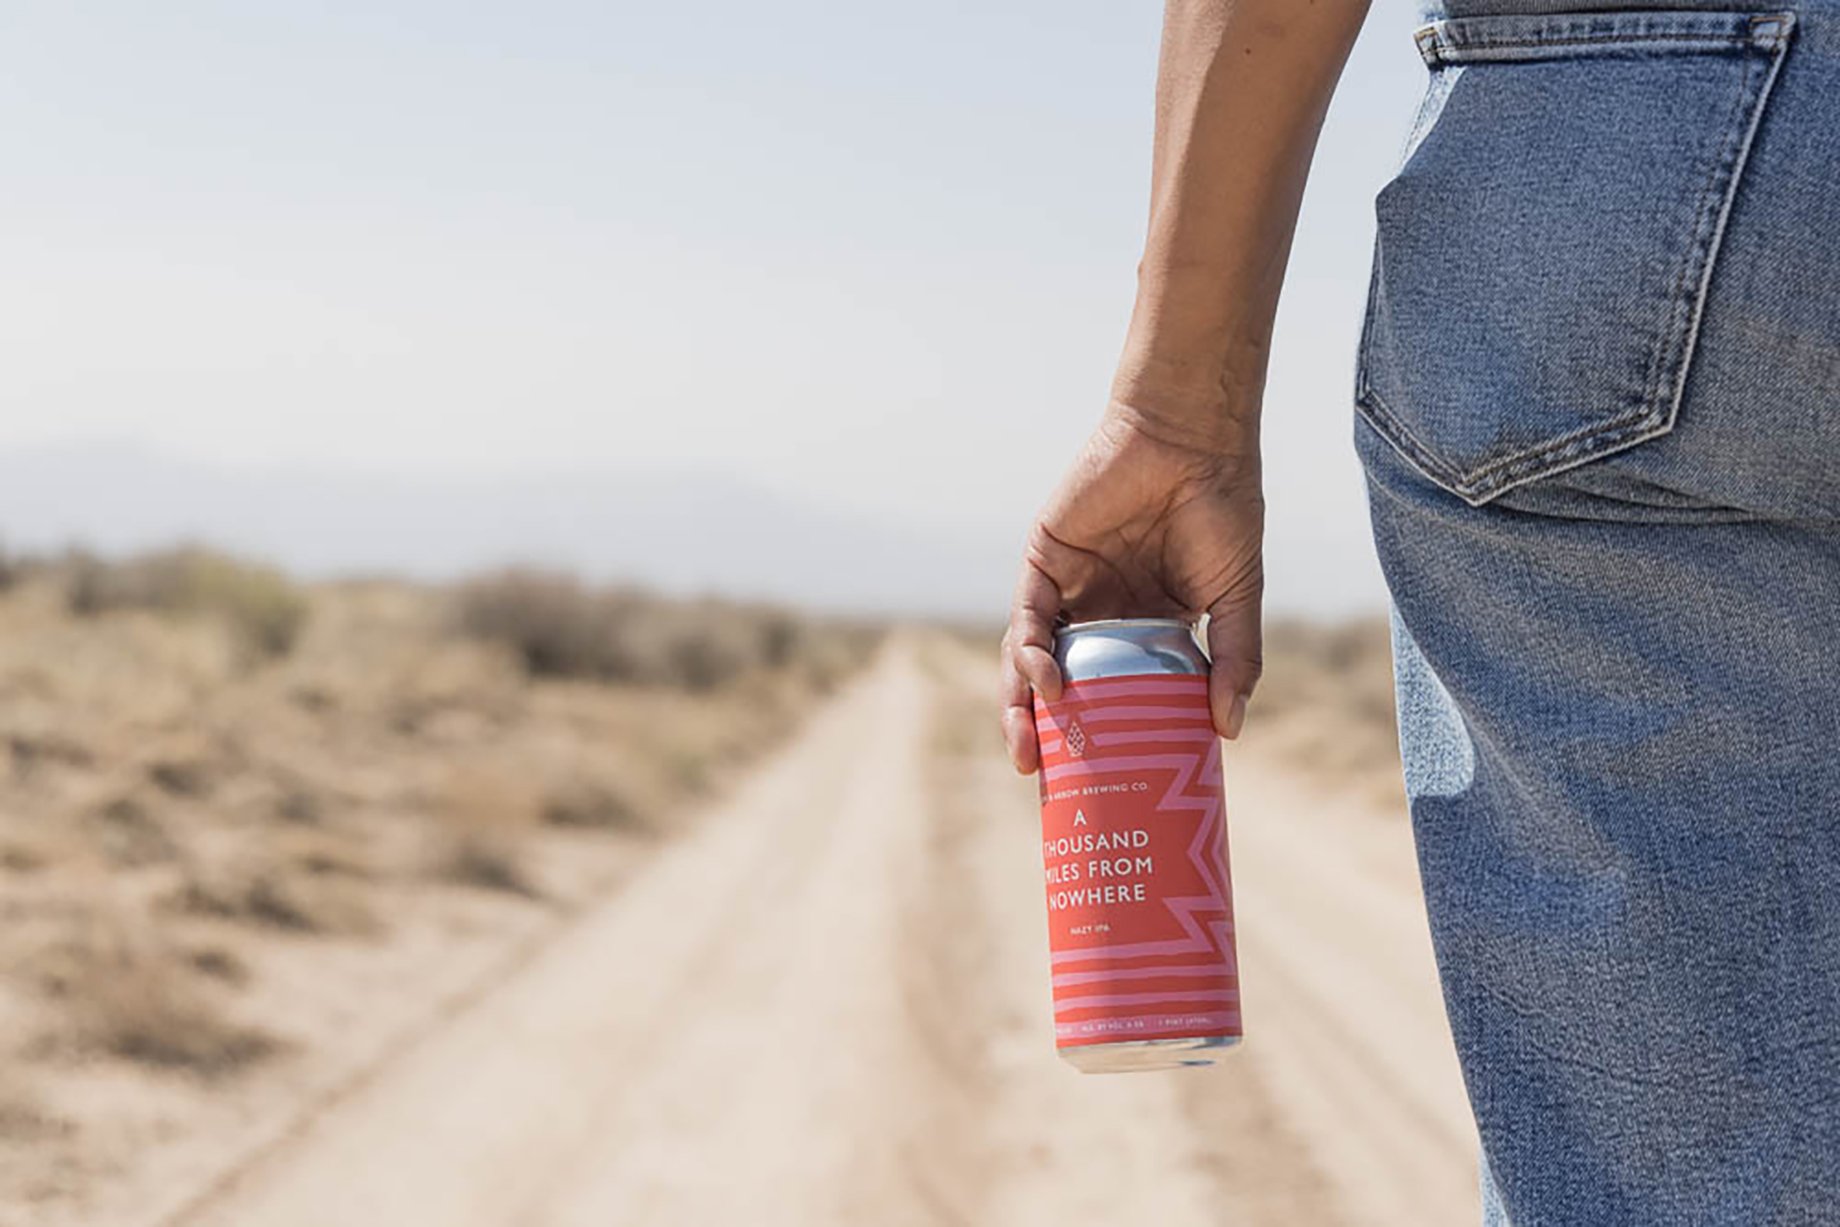 Beer can from Bow & Arrow Brewery on a dirt road shot by Minesh Bacarina for Outside Magazine